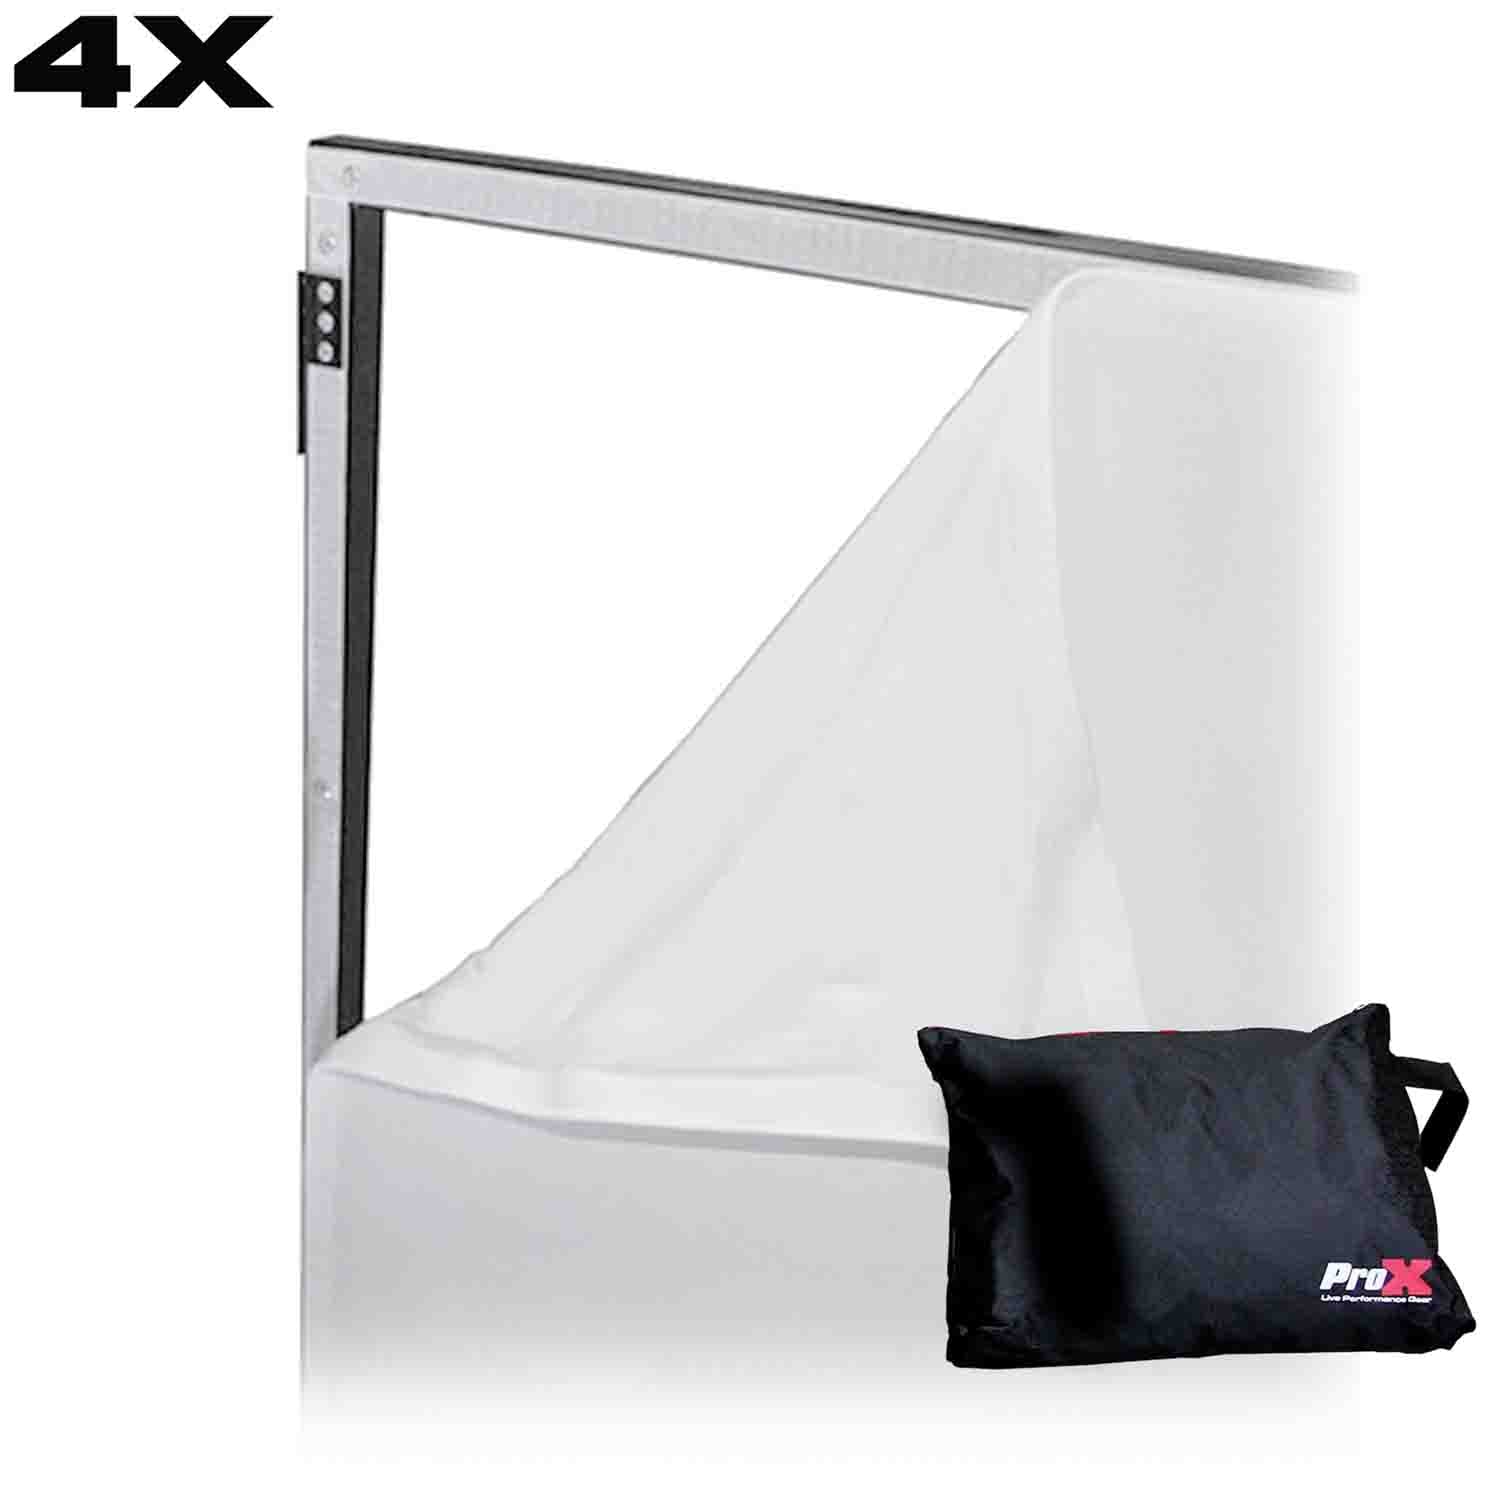 ProX XF-S3048WX4 BAG Replacement Four Panel x4 Scrim Kit for ProX Facades White Fabric - Hollywood DJ